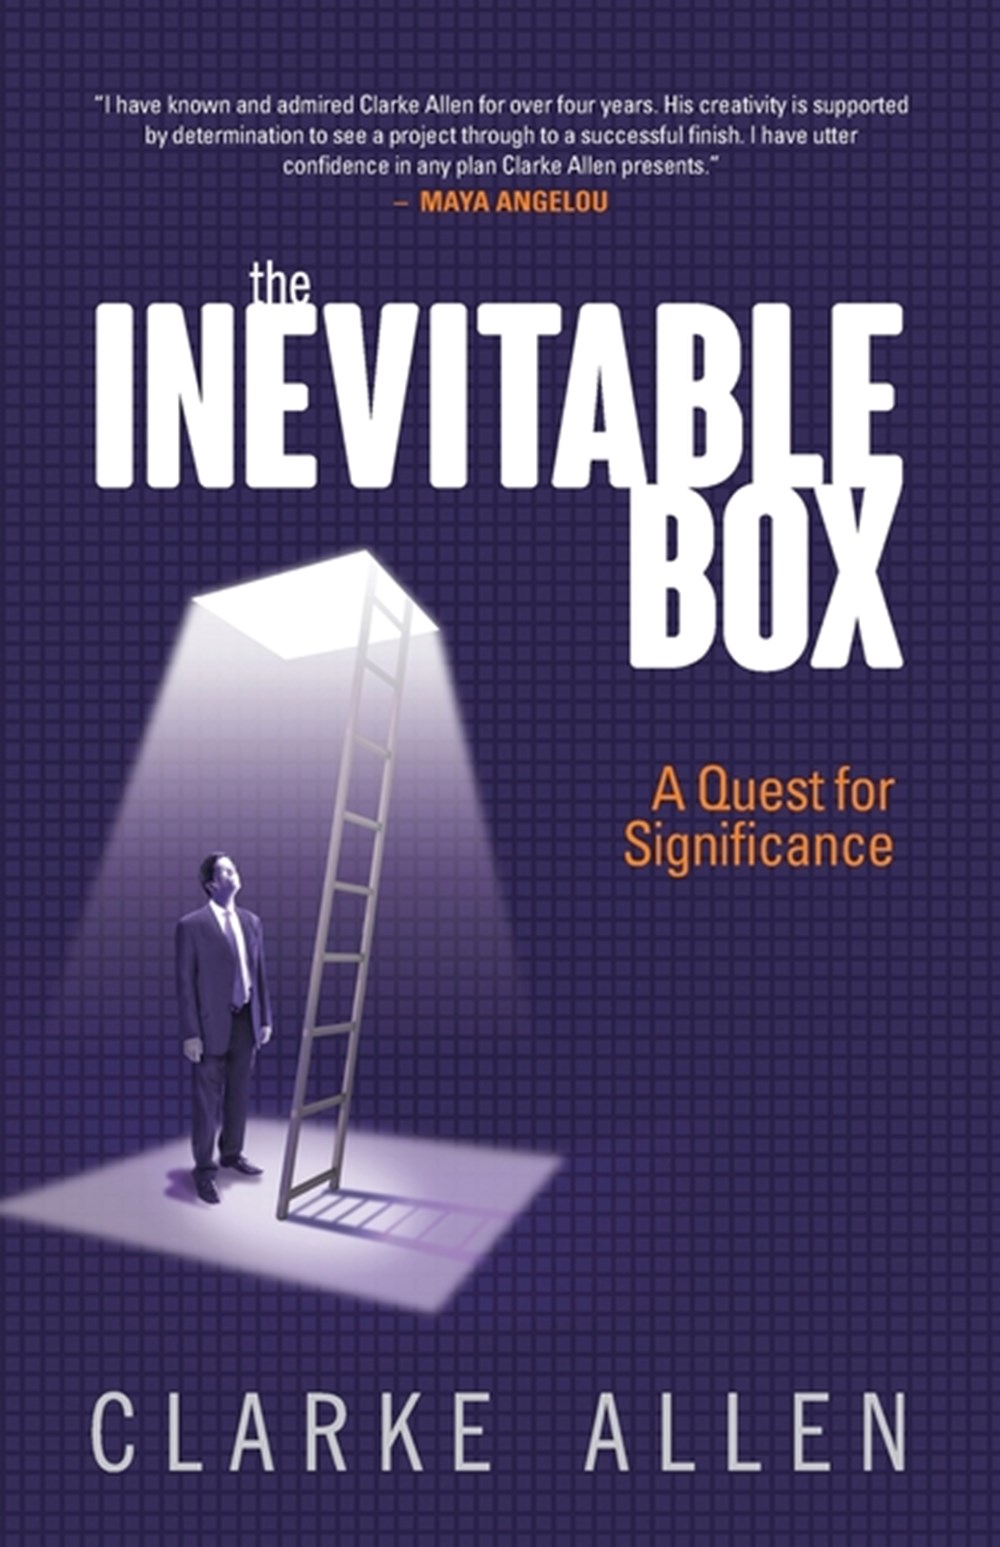 Inevitable Box: A Quest for Significance